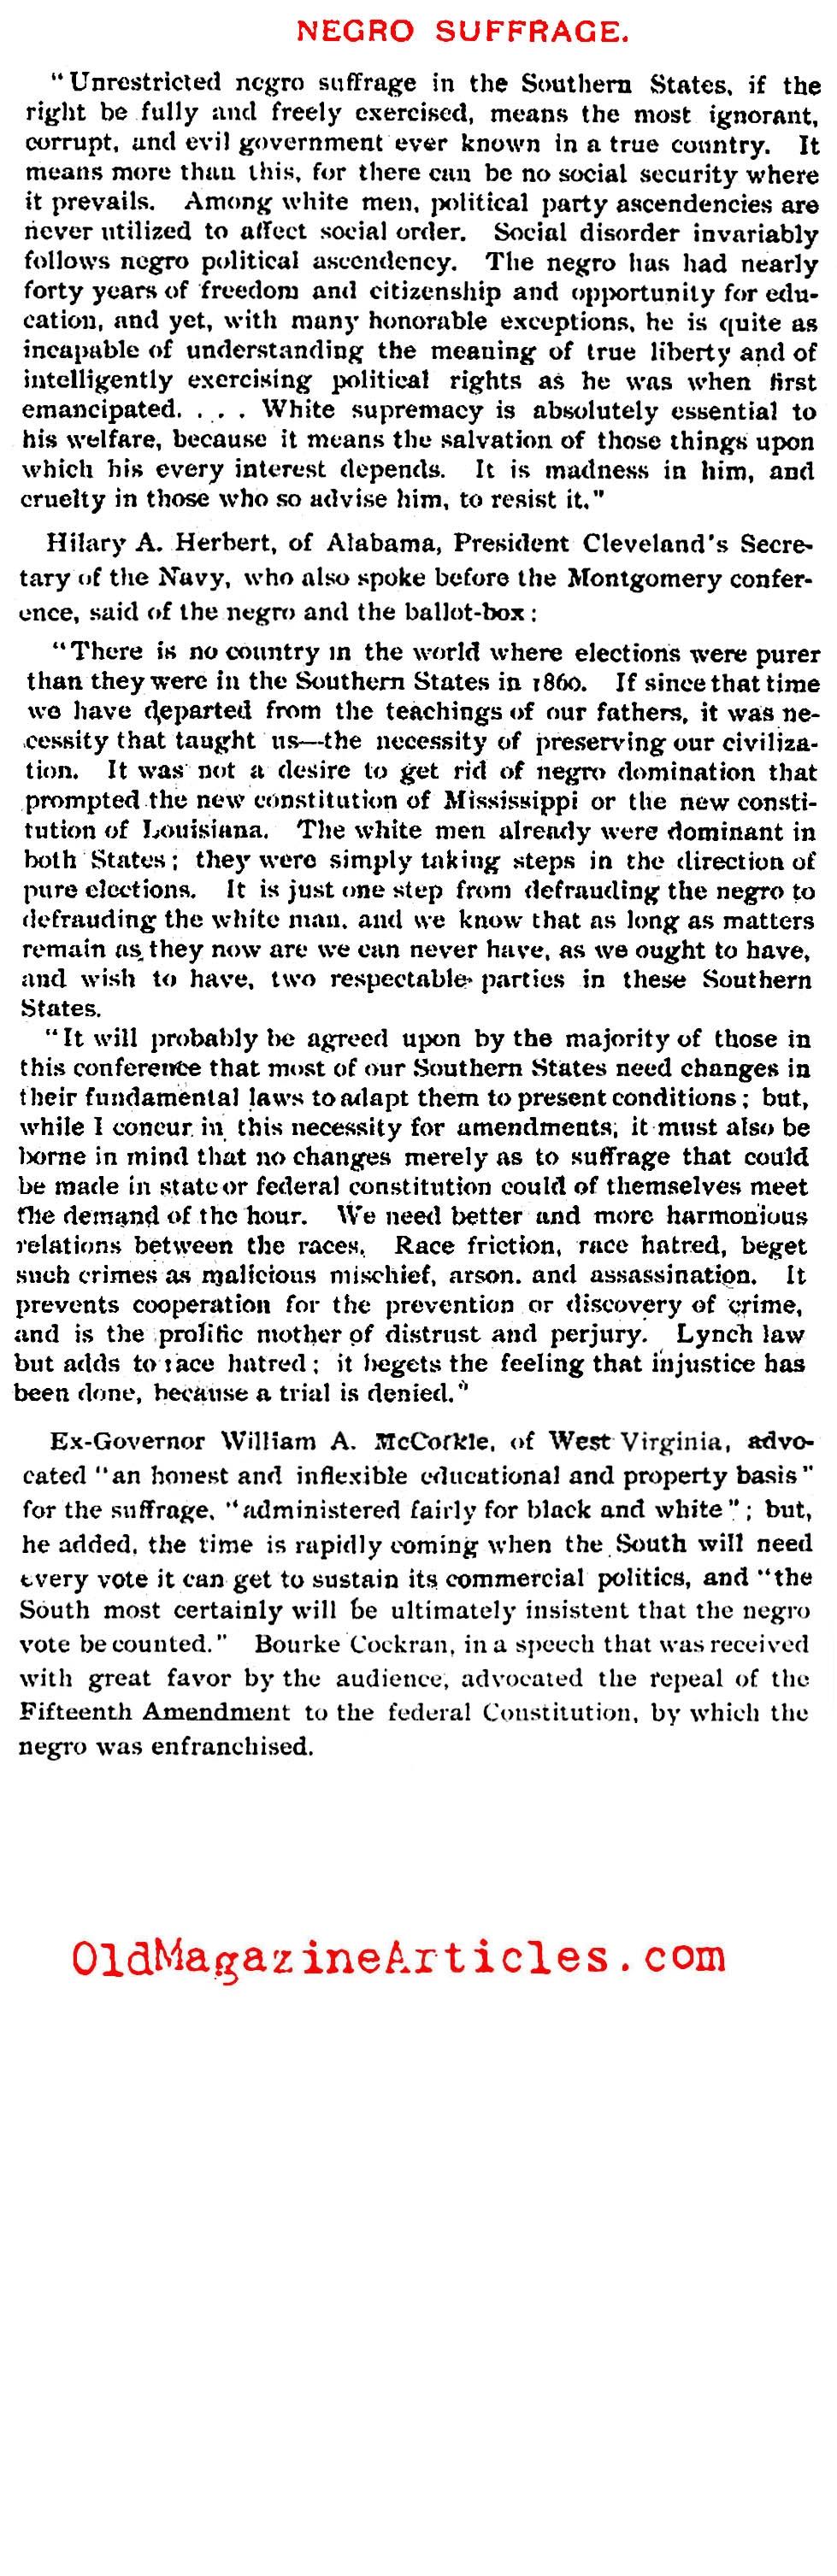 ''Southern Opinions on Negro Suffrage'' (Literary Digest, 1900)